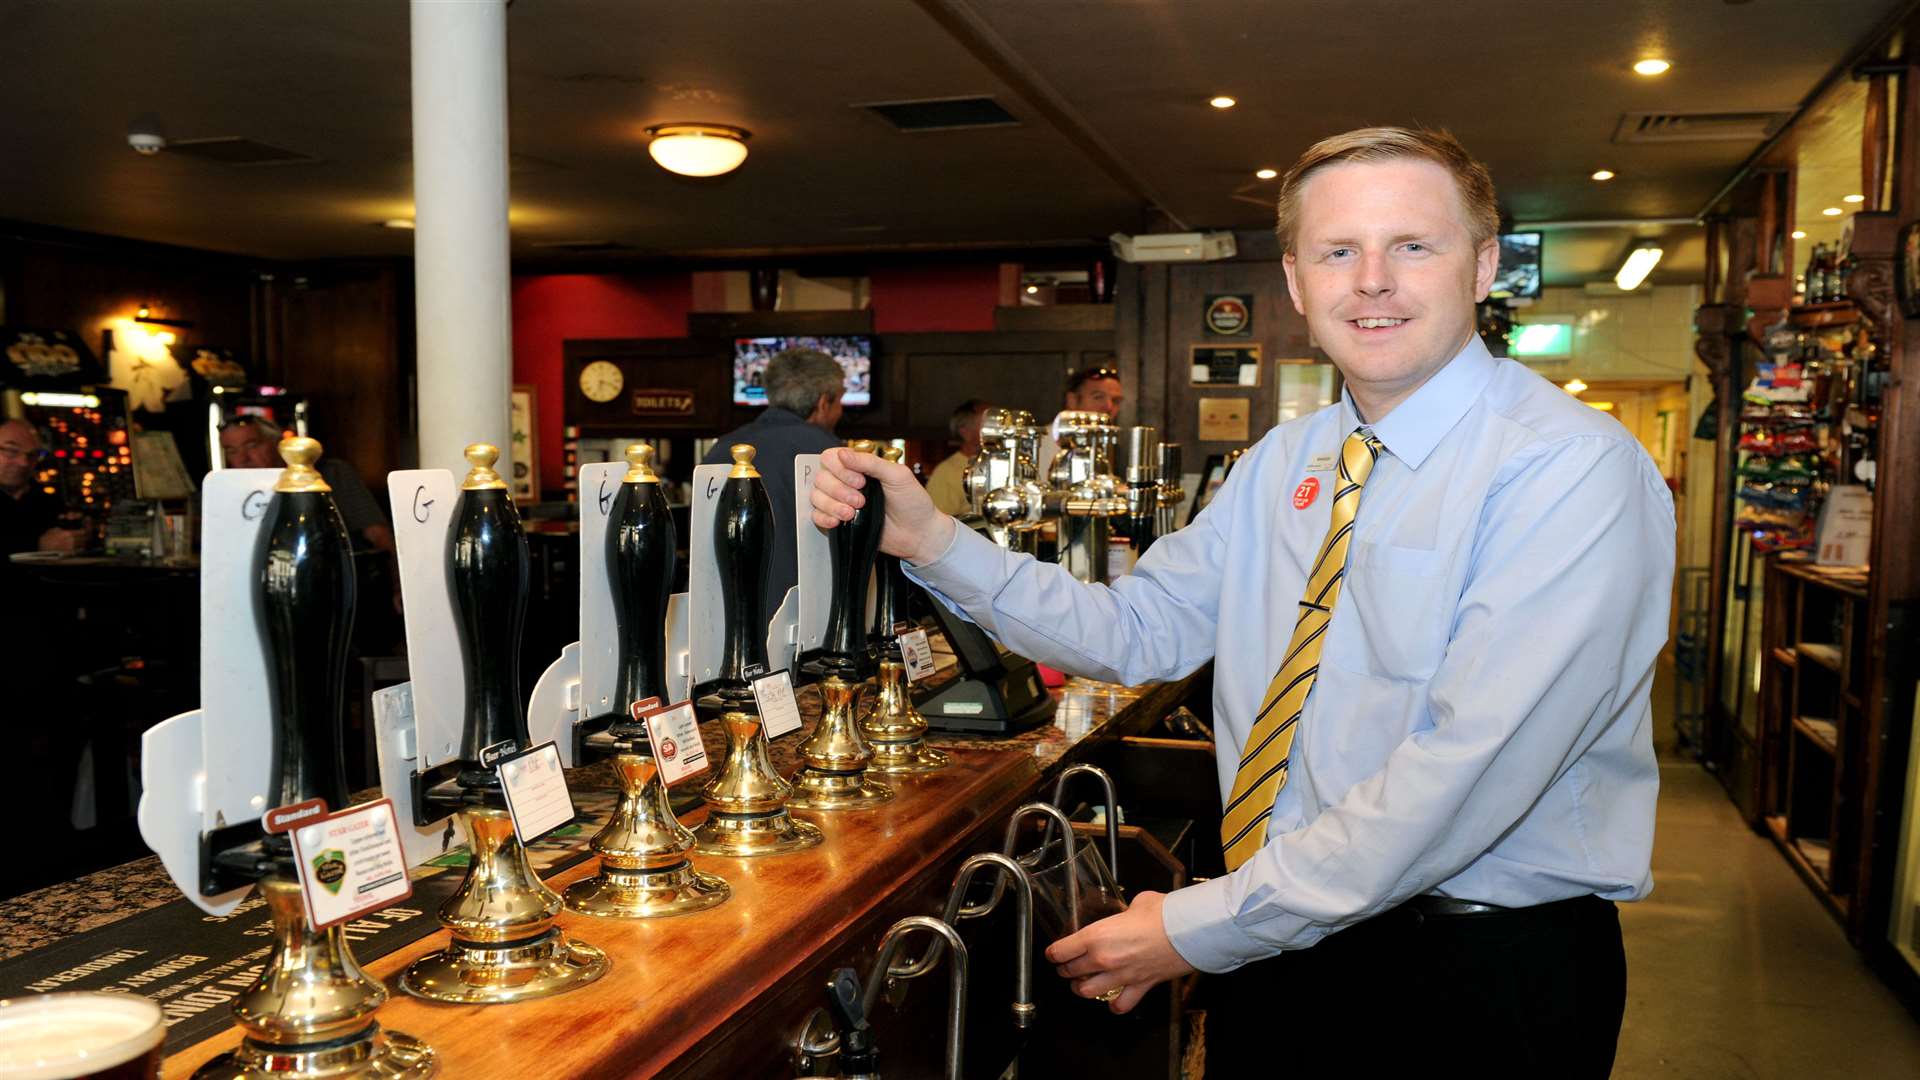 Rob Harris, pub manager at the Robert Pocock in Windmill Street, Gravesend